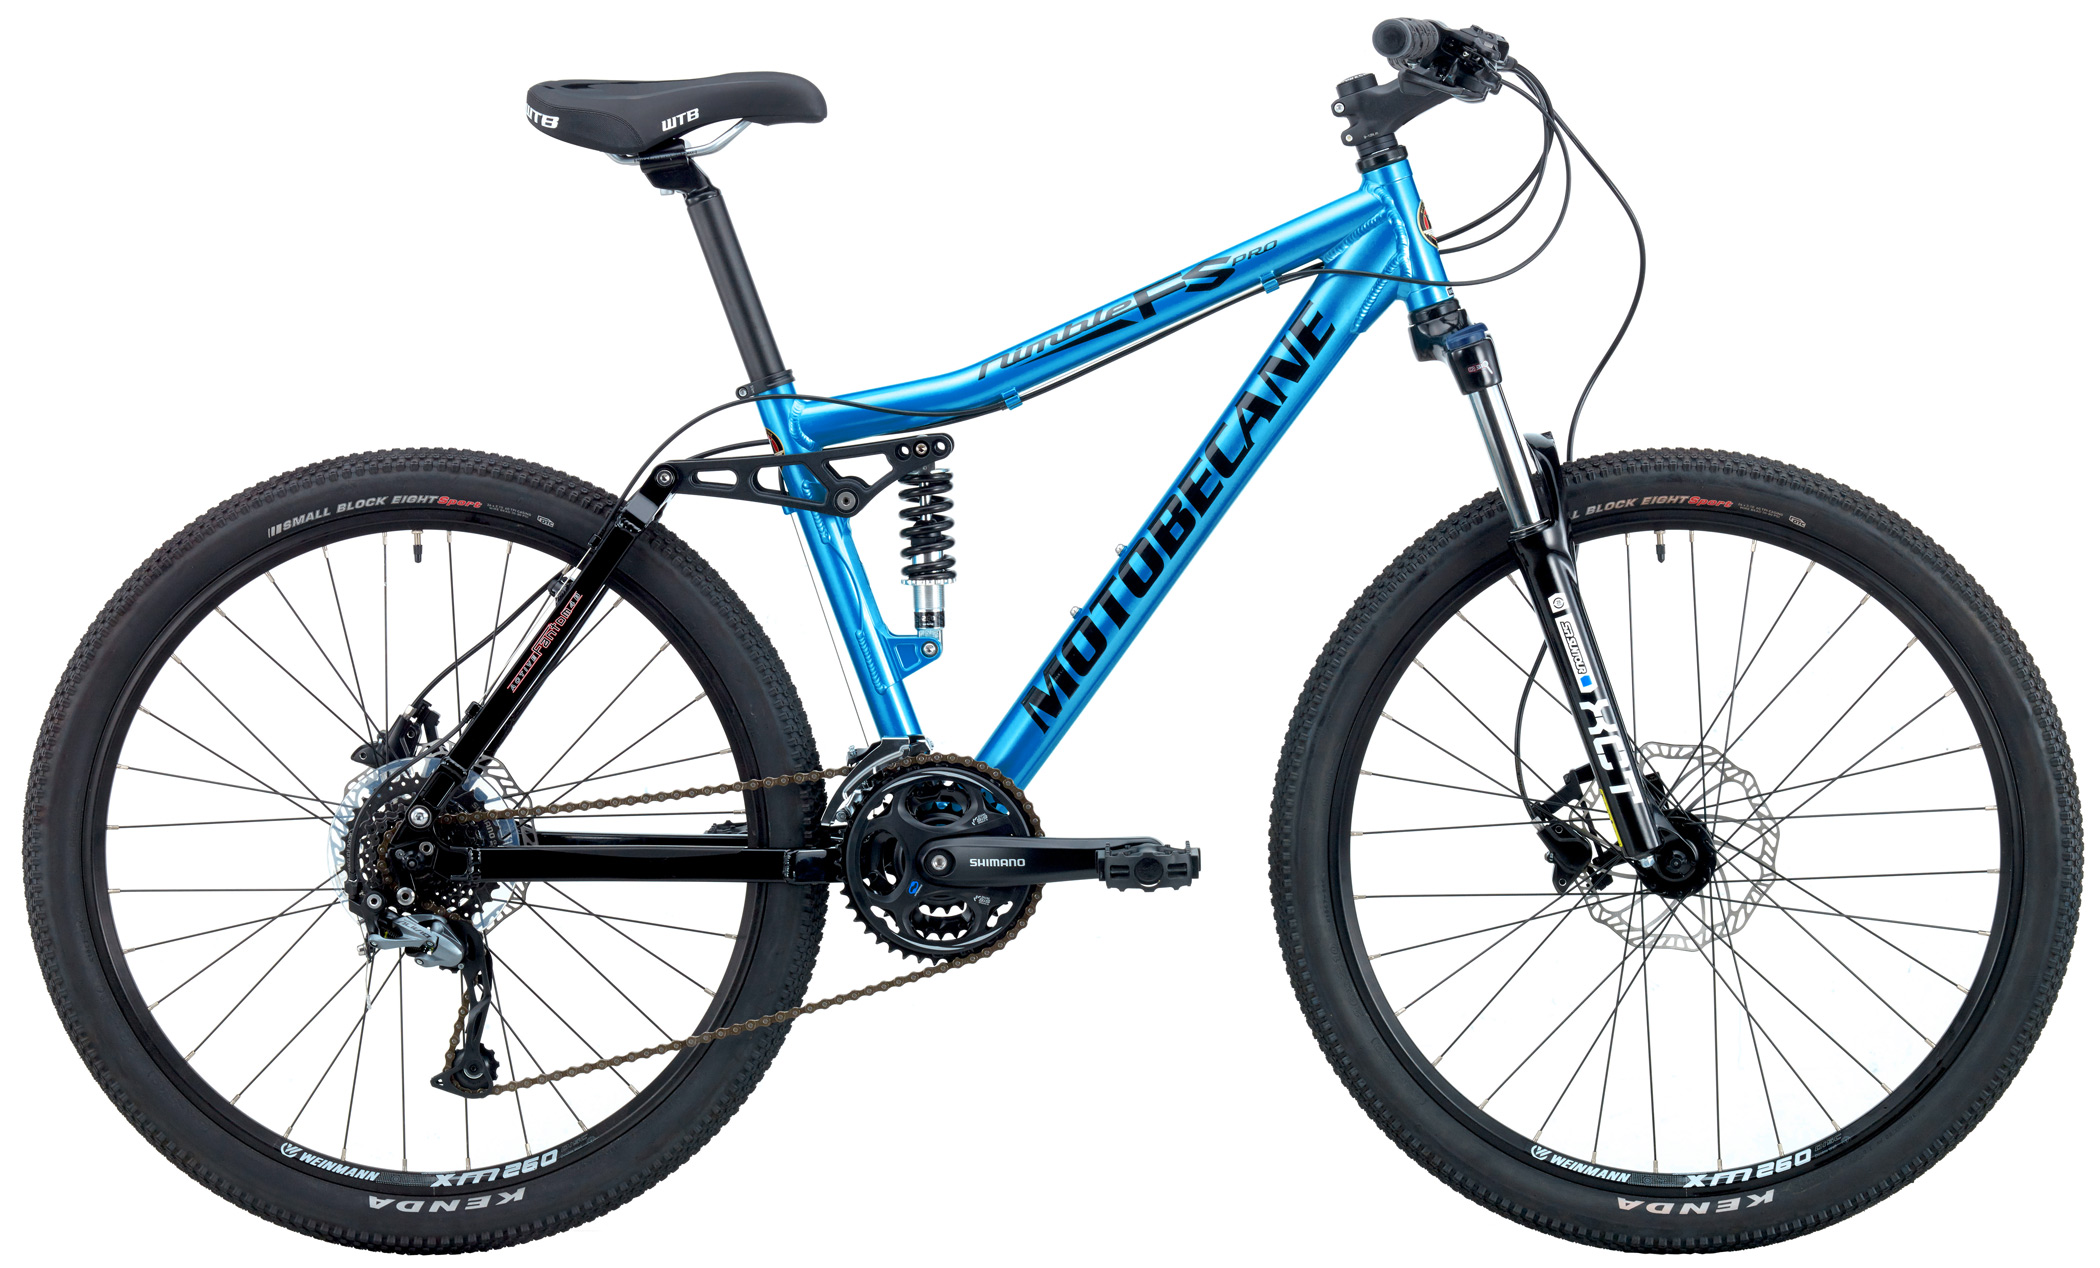 Save up to 60% off new Mountain Bikes - Powerful Hydraulic Disk Brakes